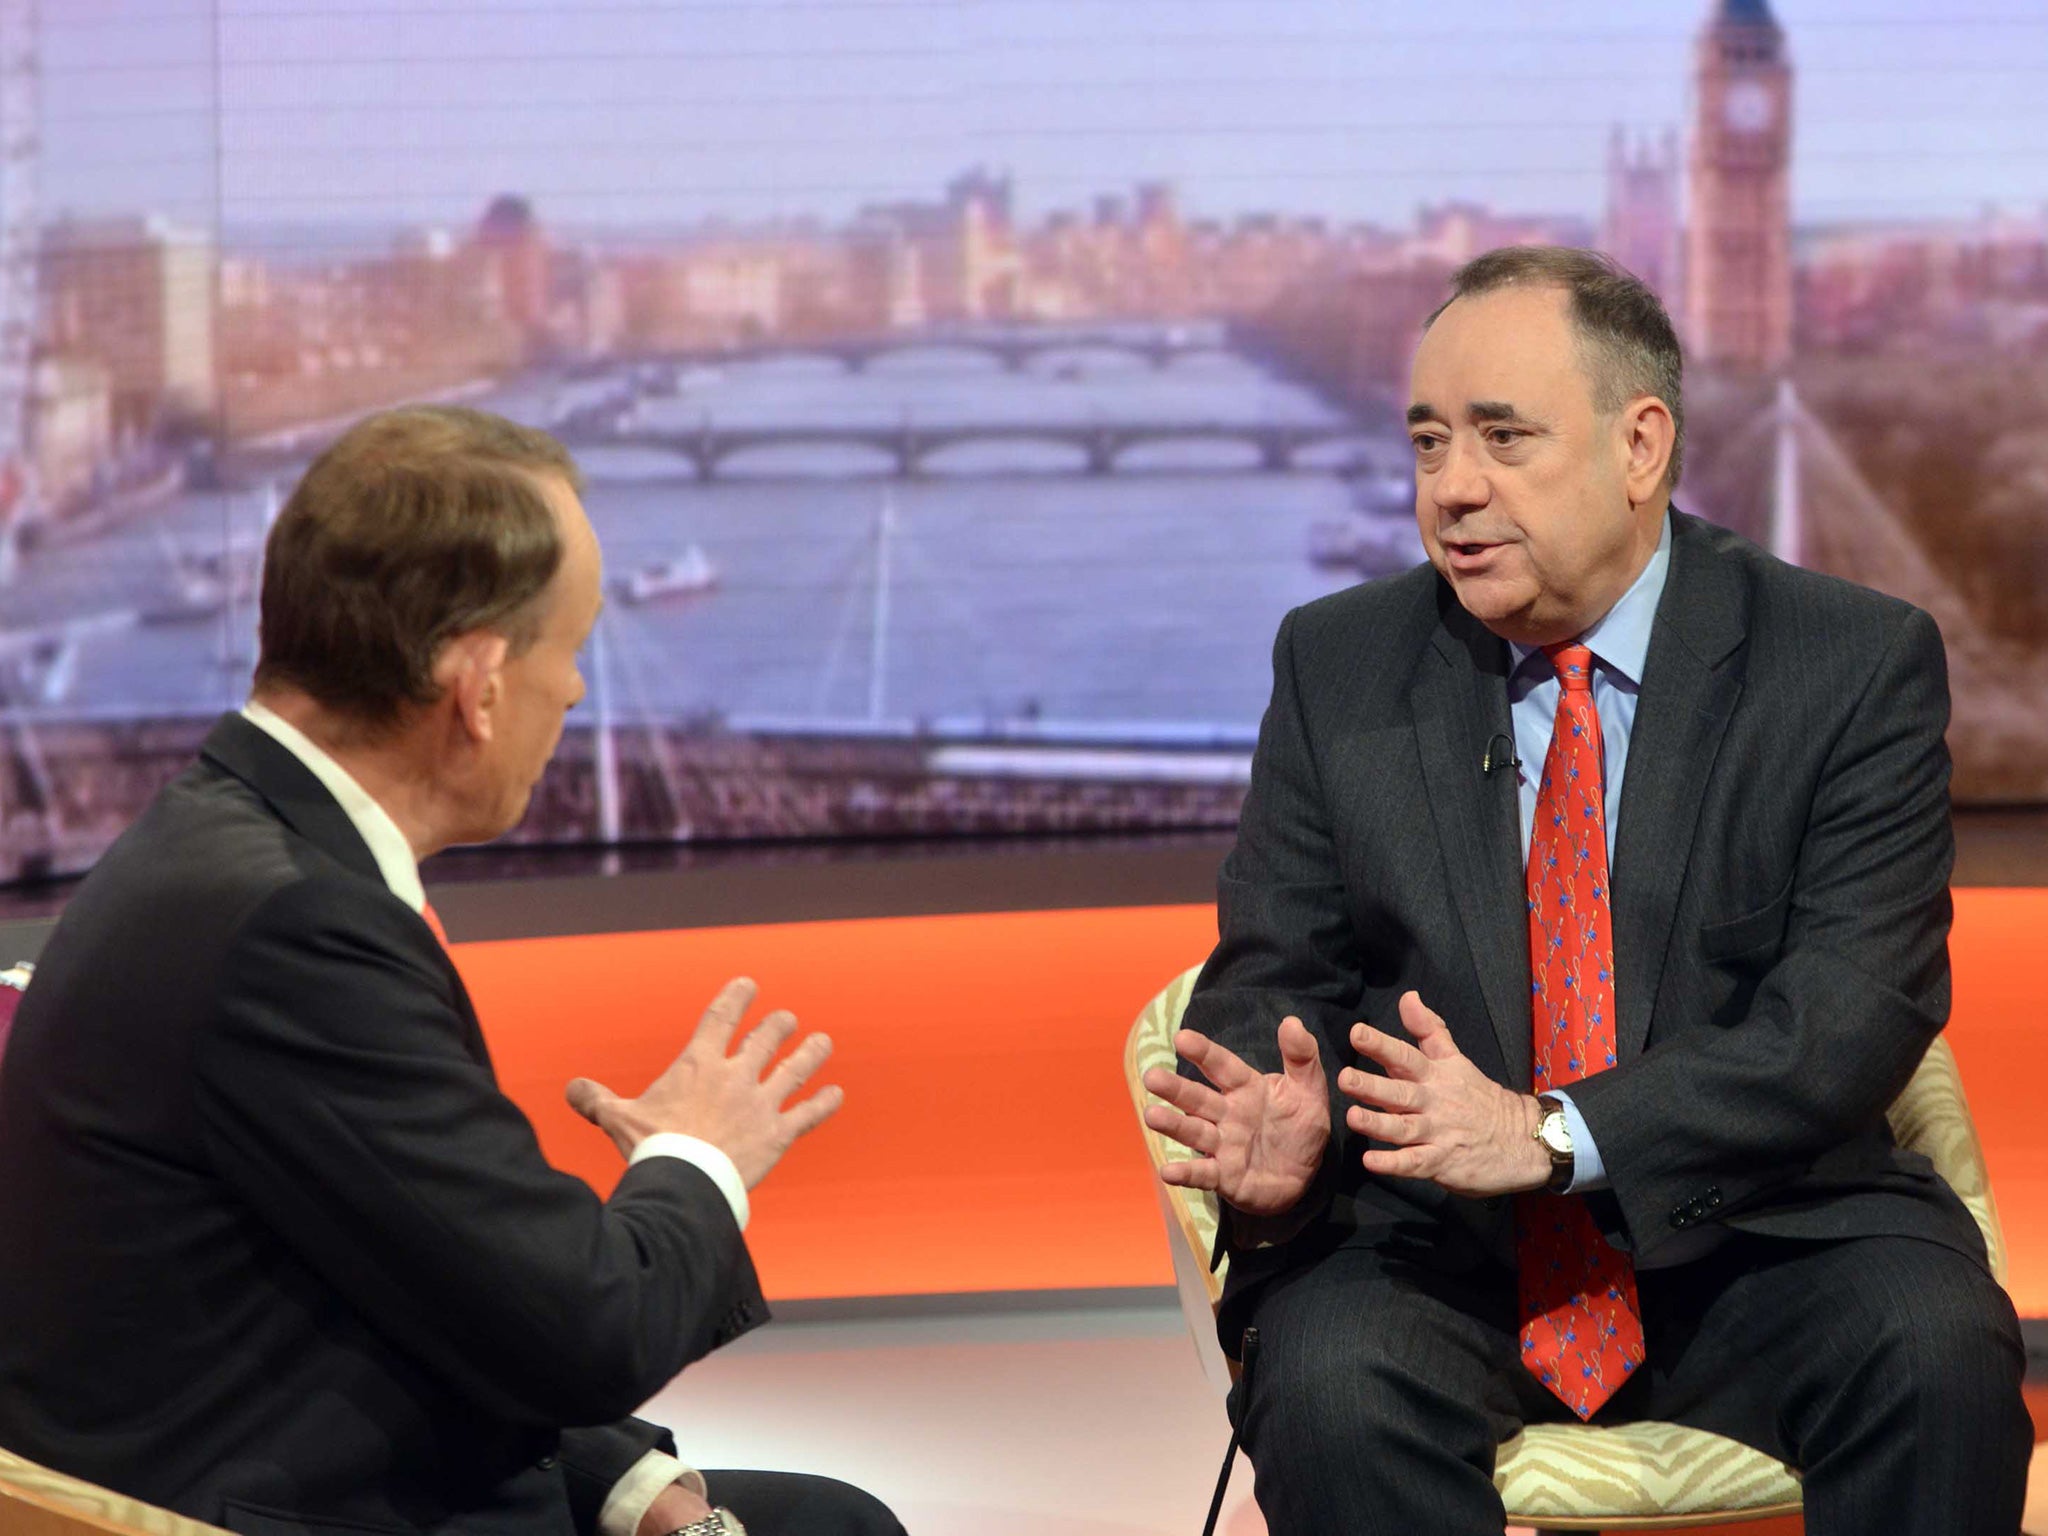 Former First Minister Alex Salmond on ‘The Andrew Marr Show’ earlier this year. He has asserted that BBC bias was a 'significant factor' in deciding Scottish independence referendum